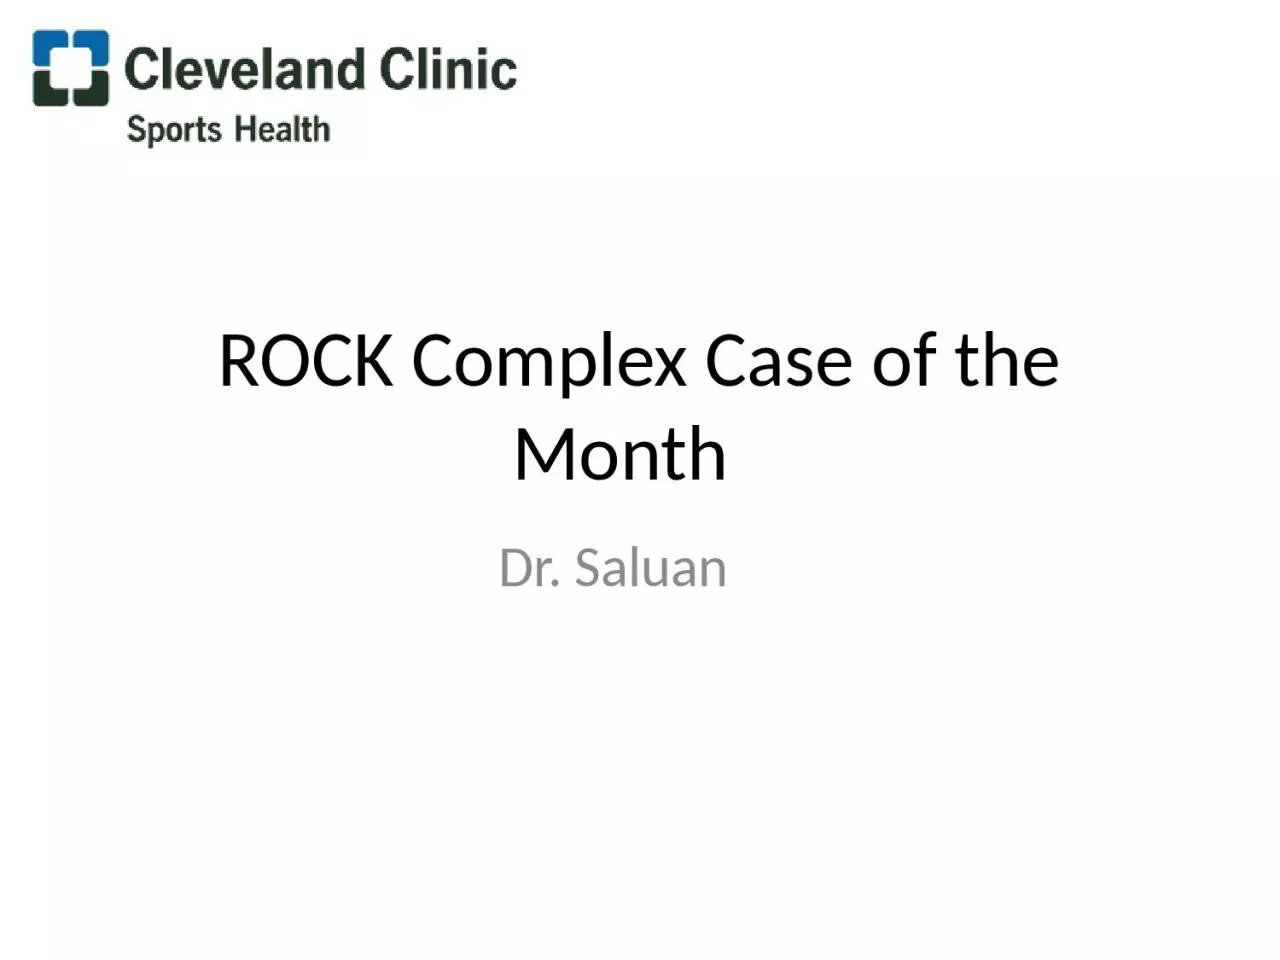 ROCK Complex Case of the Month